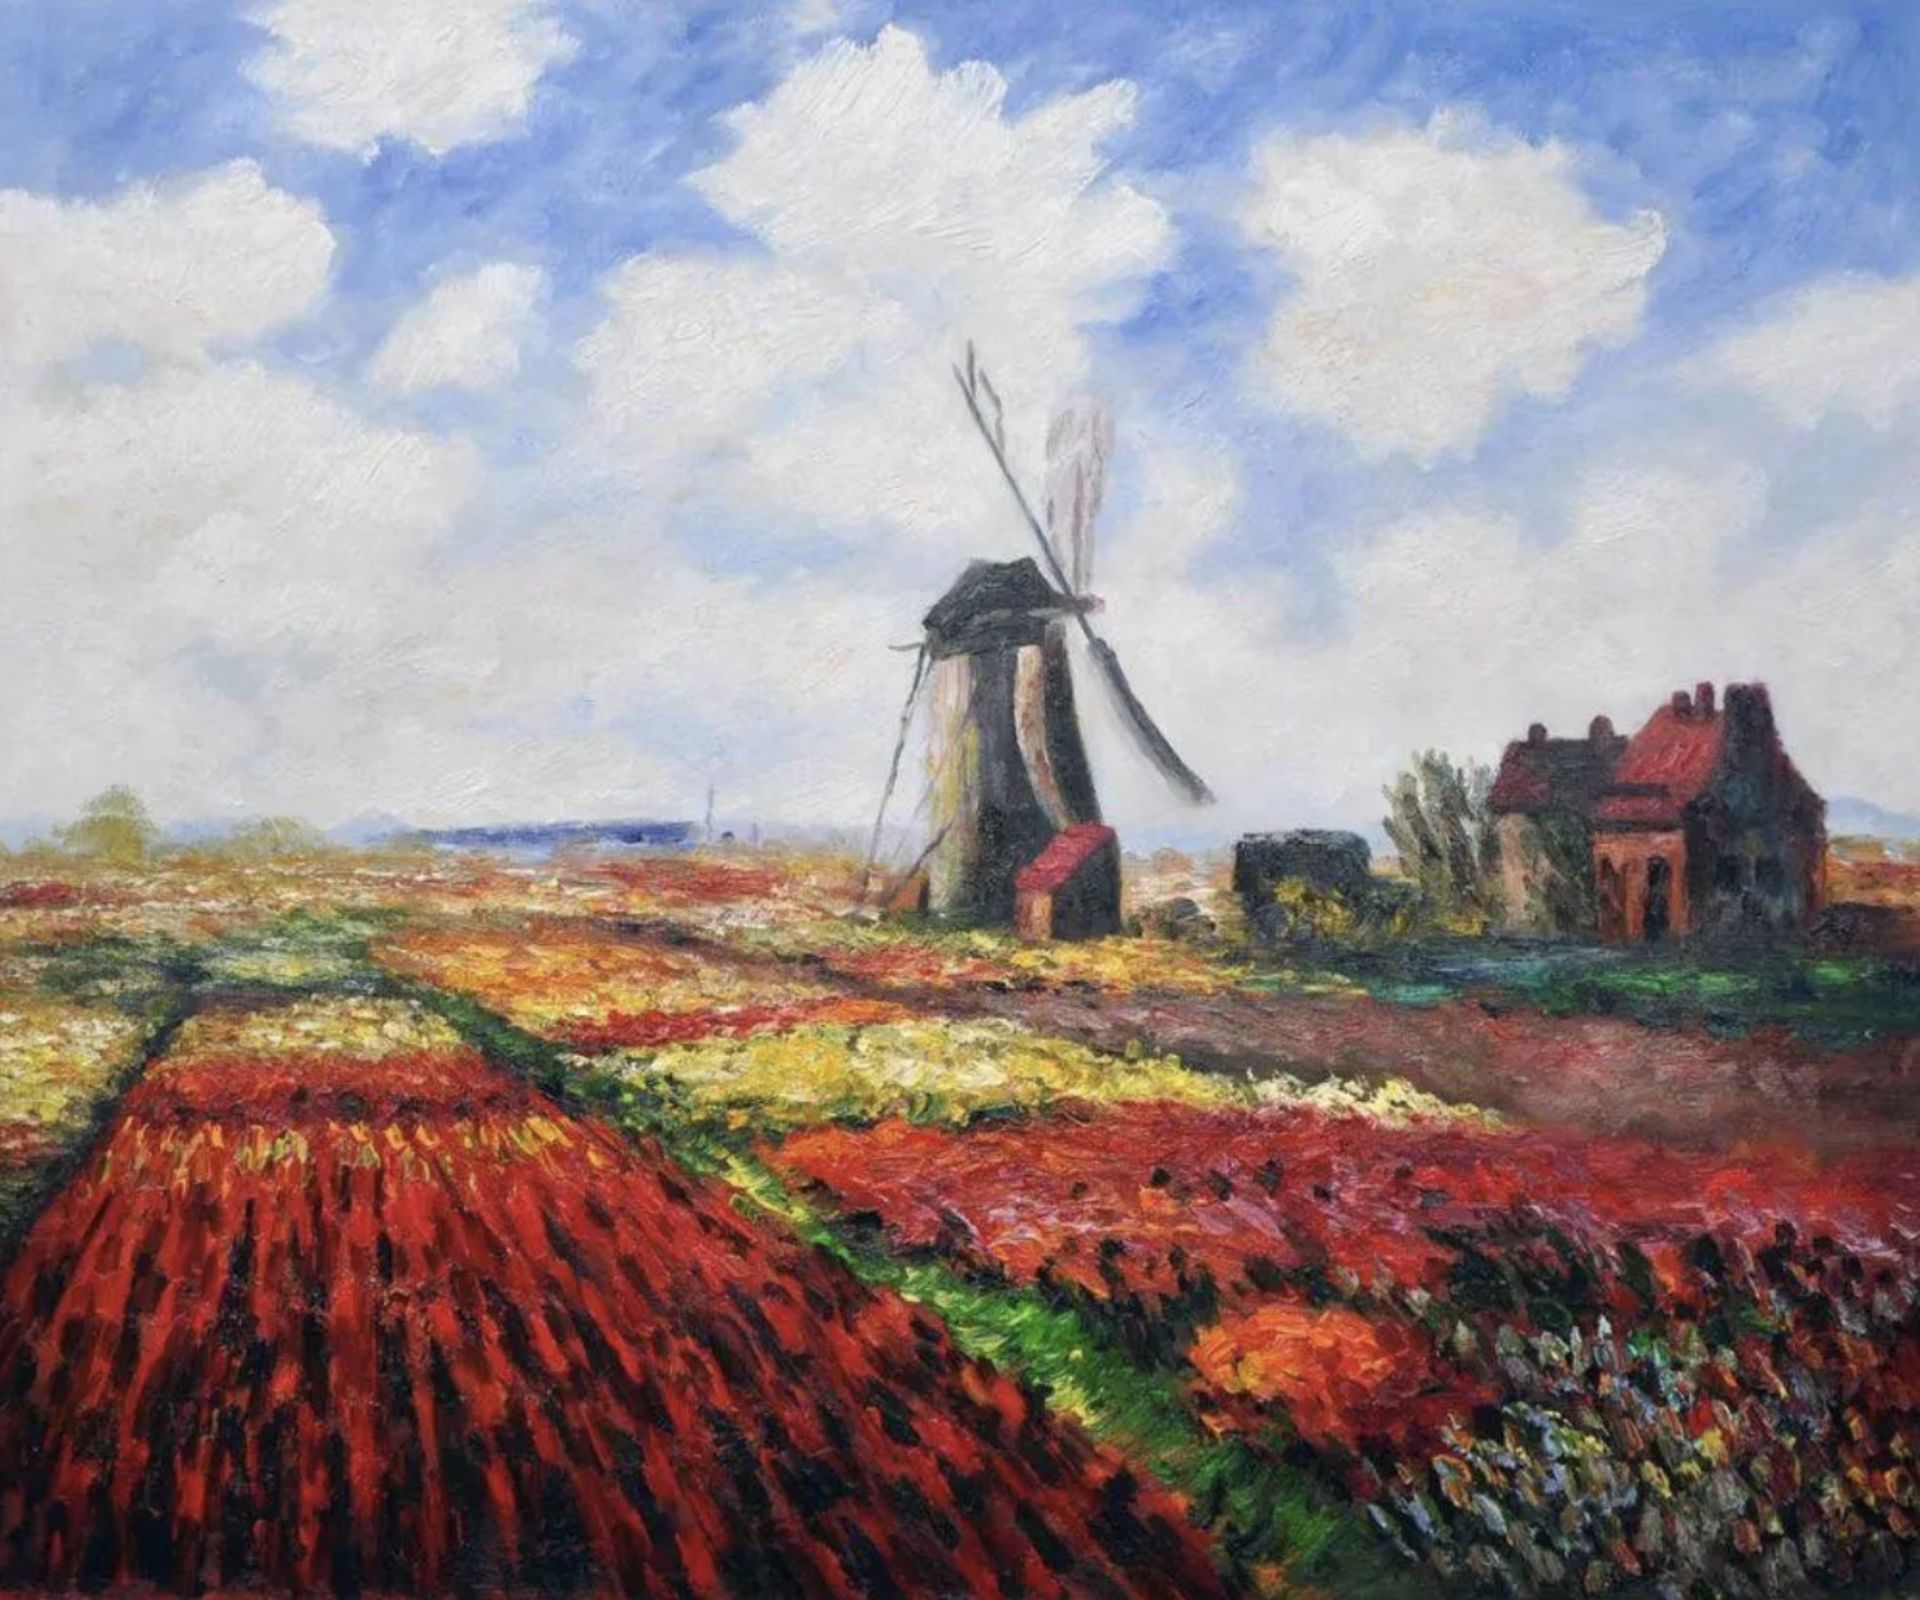 Claude Monet "Tulip Field with the Rijnsburg Windmill, 1886" Oil Painting